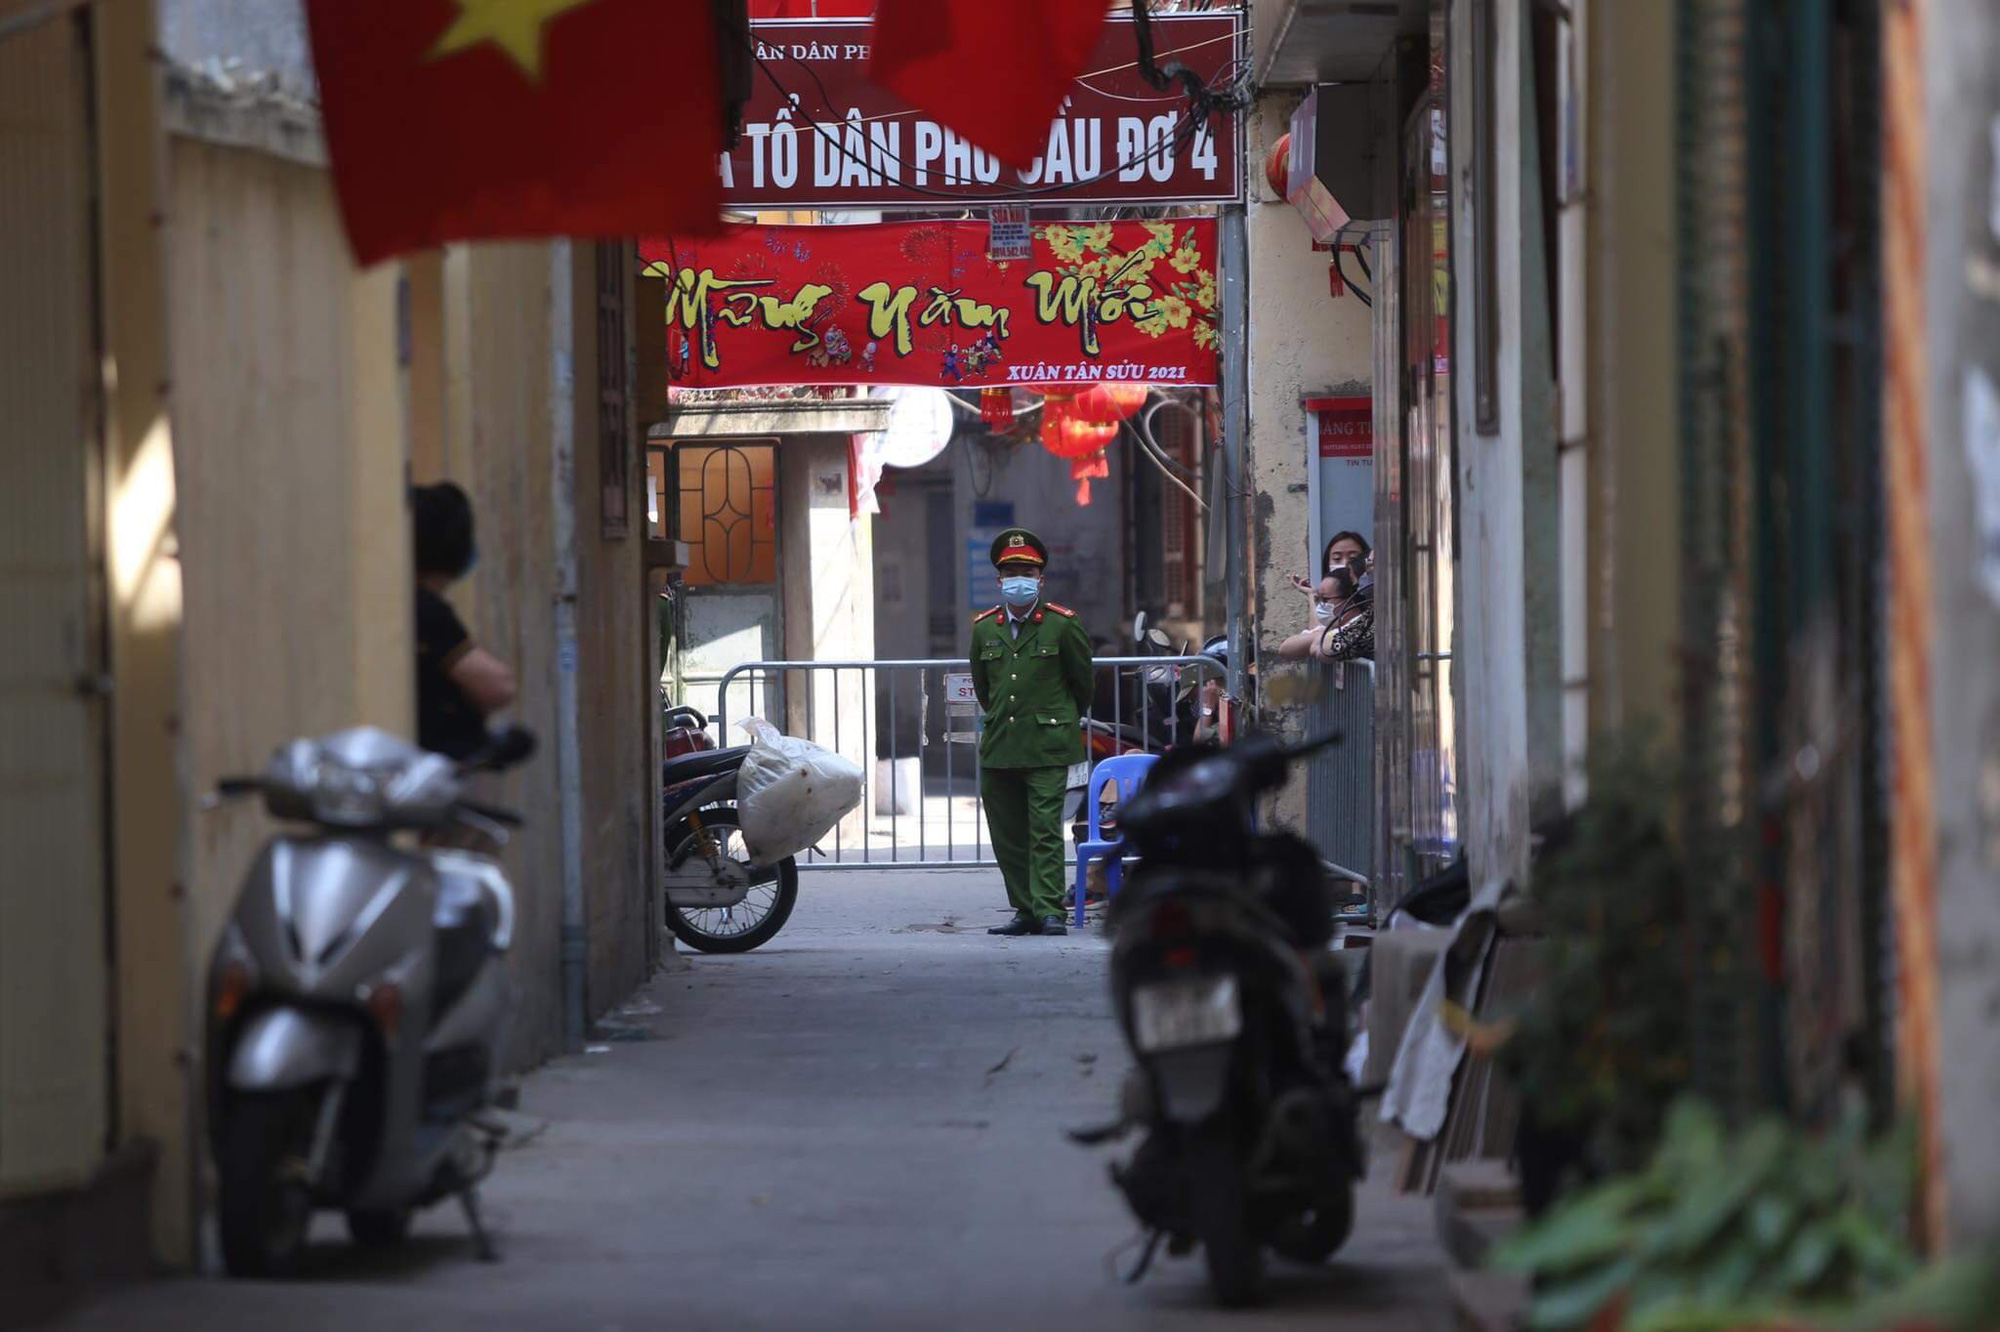 Police officers probe the house of Hoang Thi Thu Huyen in Ha Dong District, Hanoi. Photo: Danh Trong / Tuoi Tre